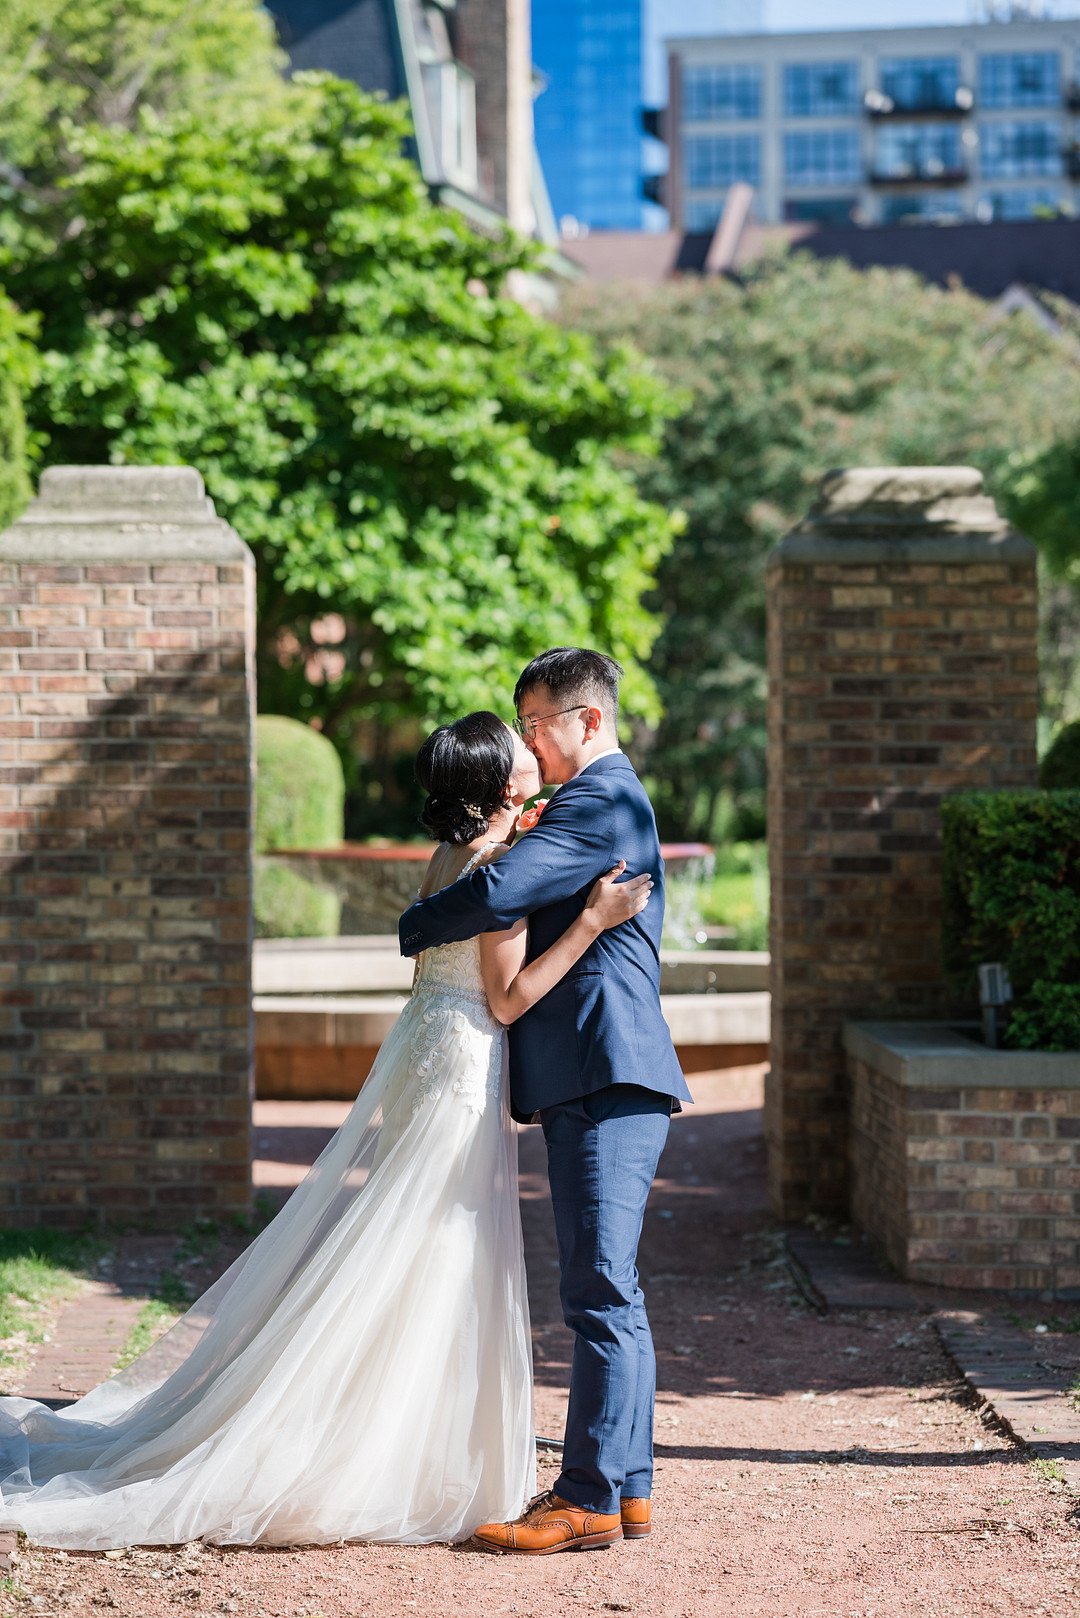 Chan_Chan_Winterlyn Photography_GLESSNER HOUSE CHICAGO WEDDING-65_low.jpg